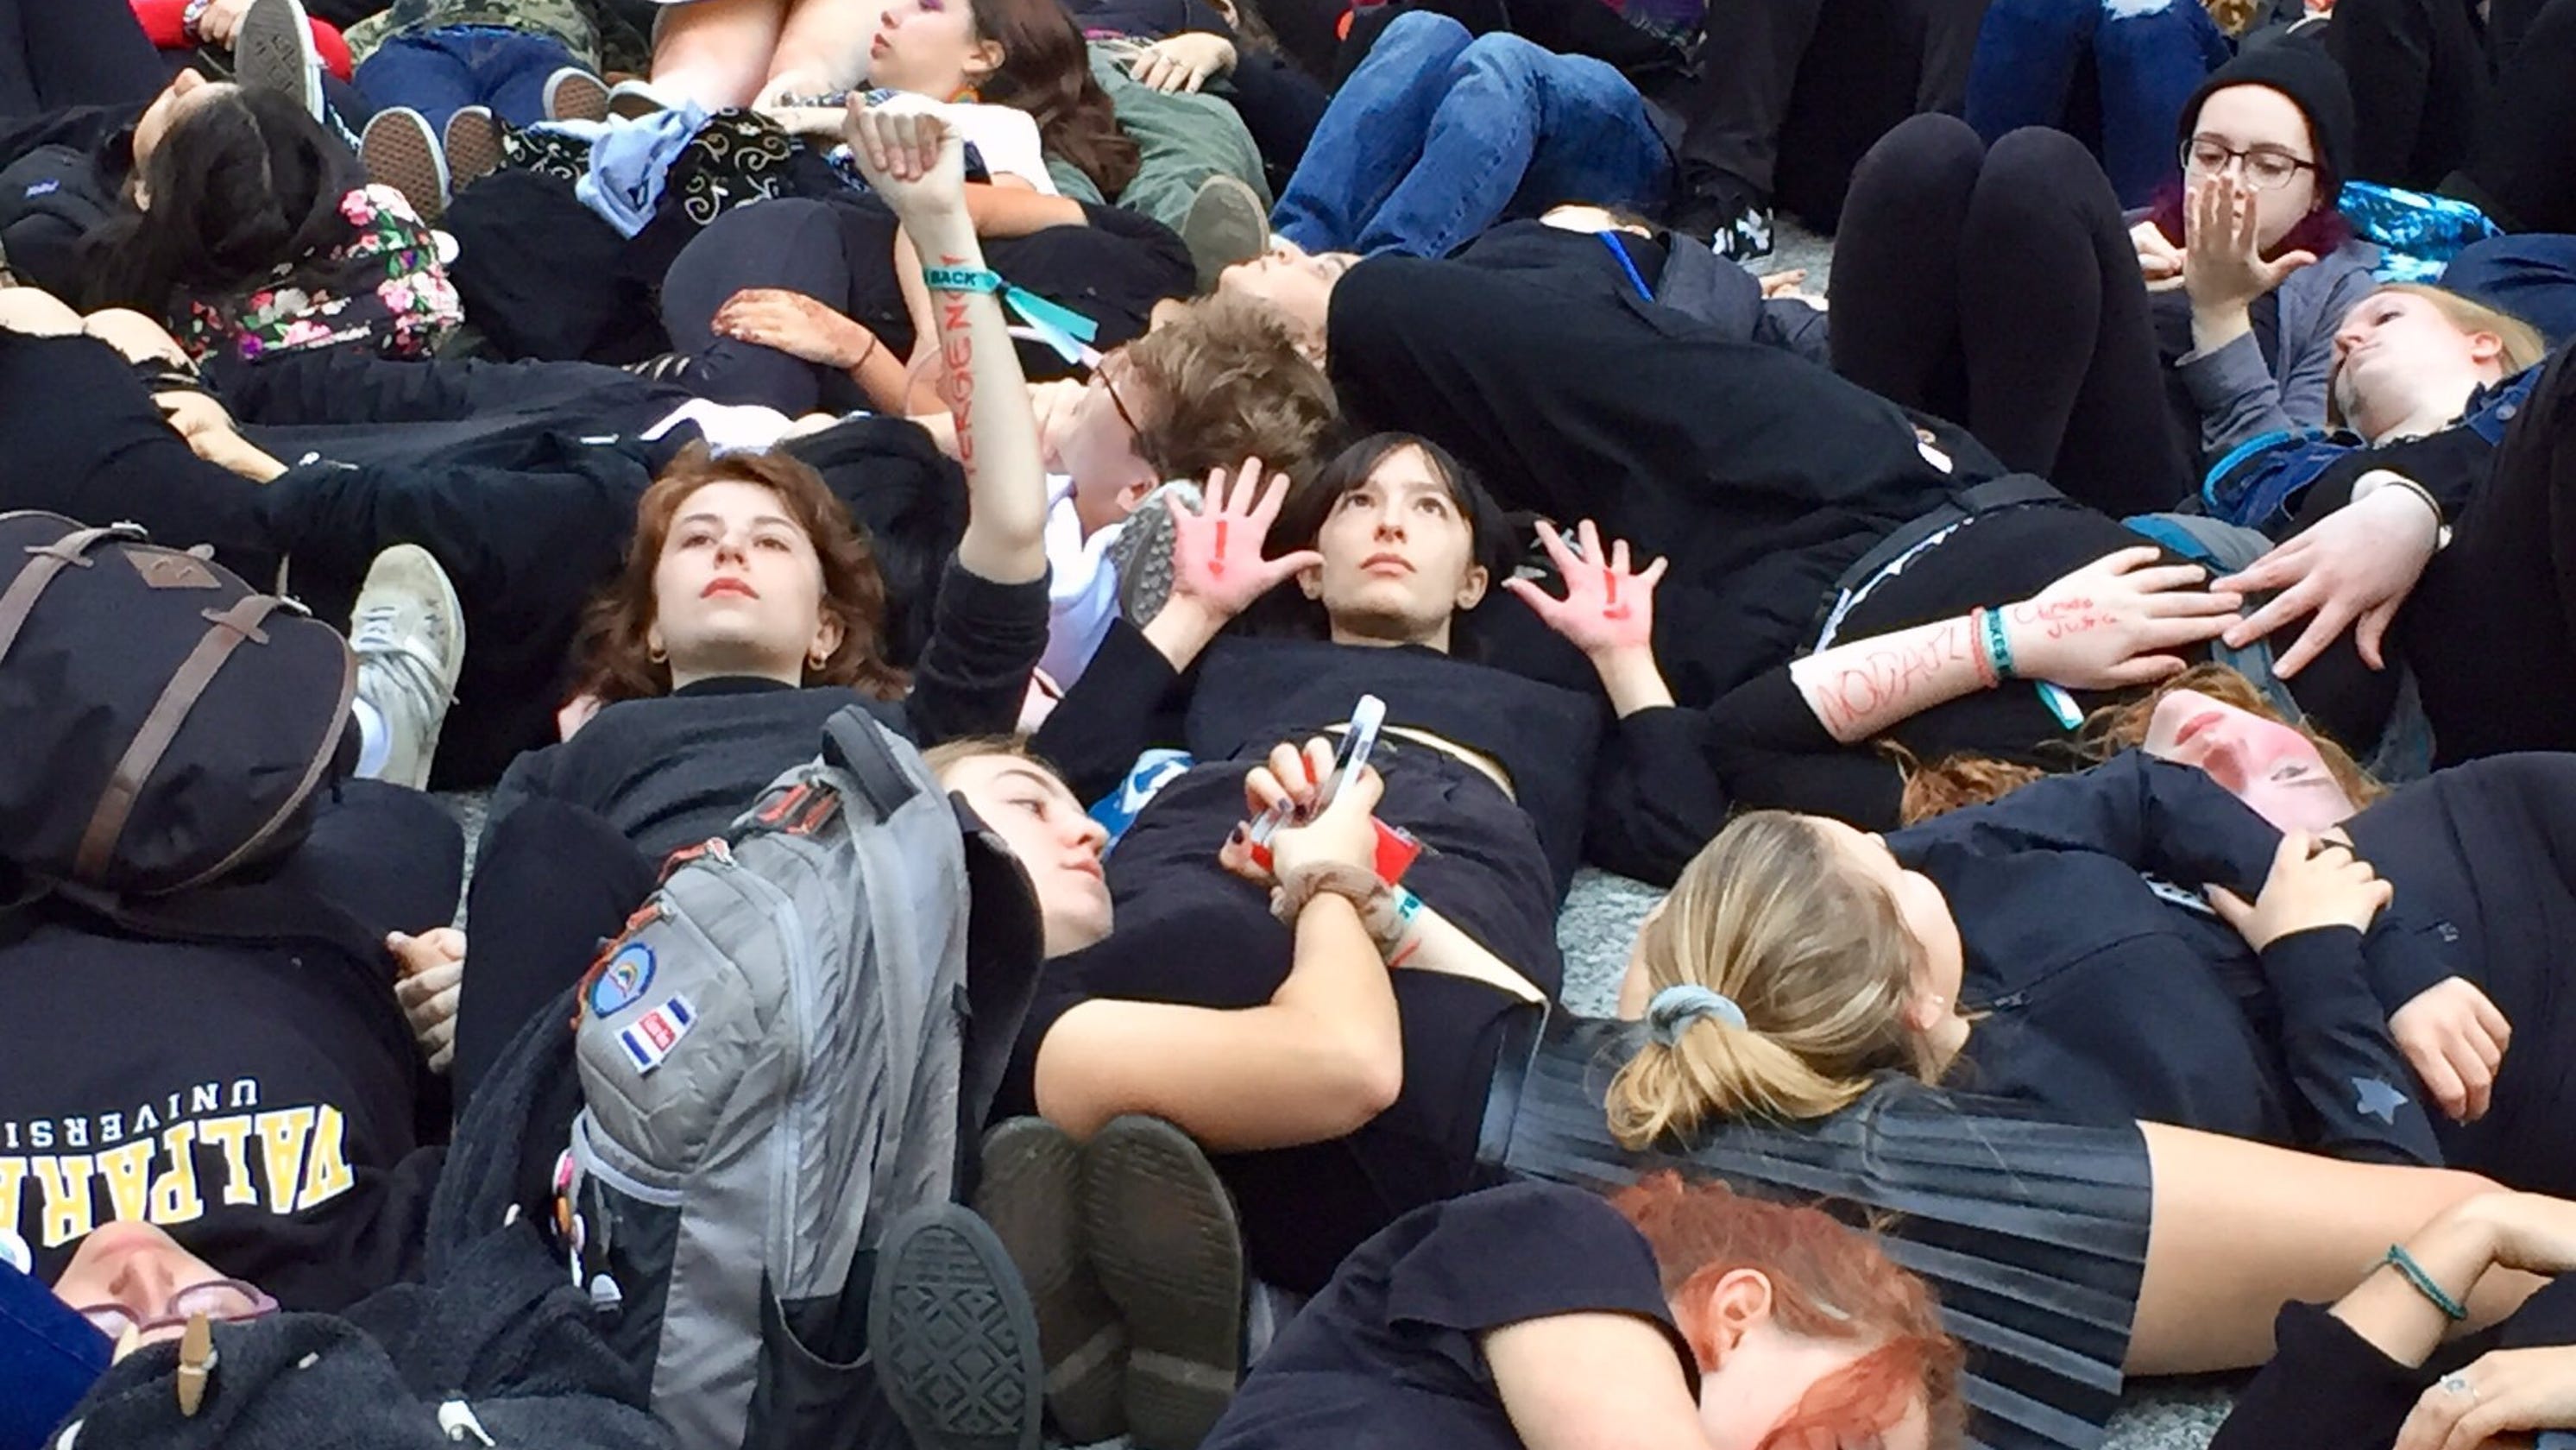 Chicago teens stage 'die-in' to demand action on climate change; one man arrested - USA TODAY